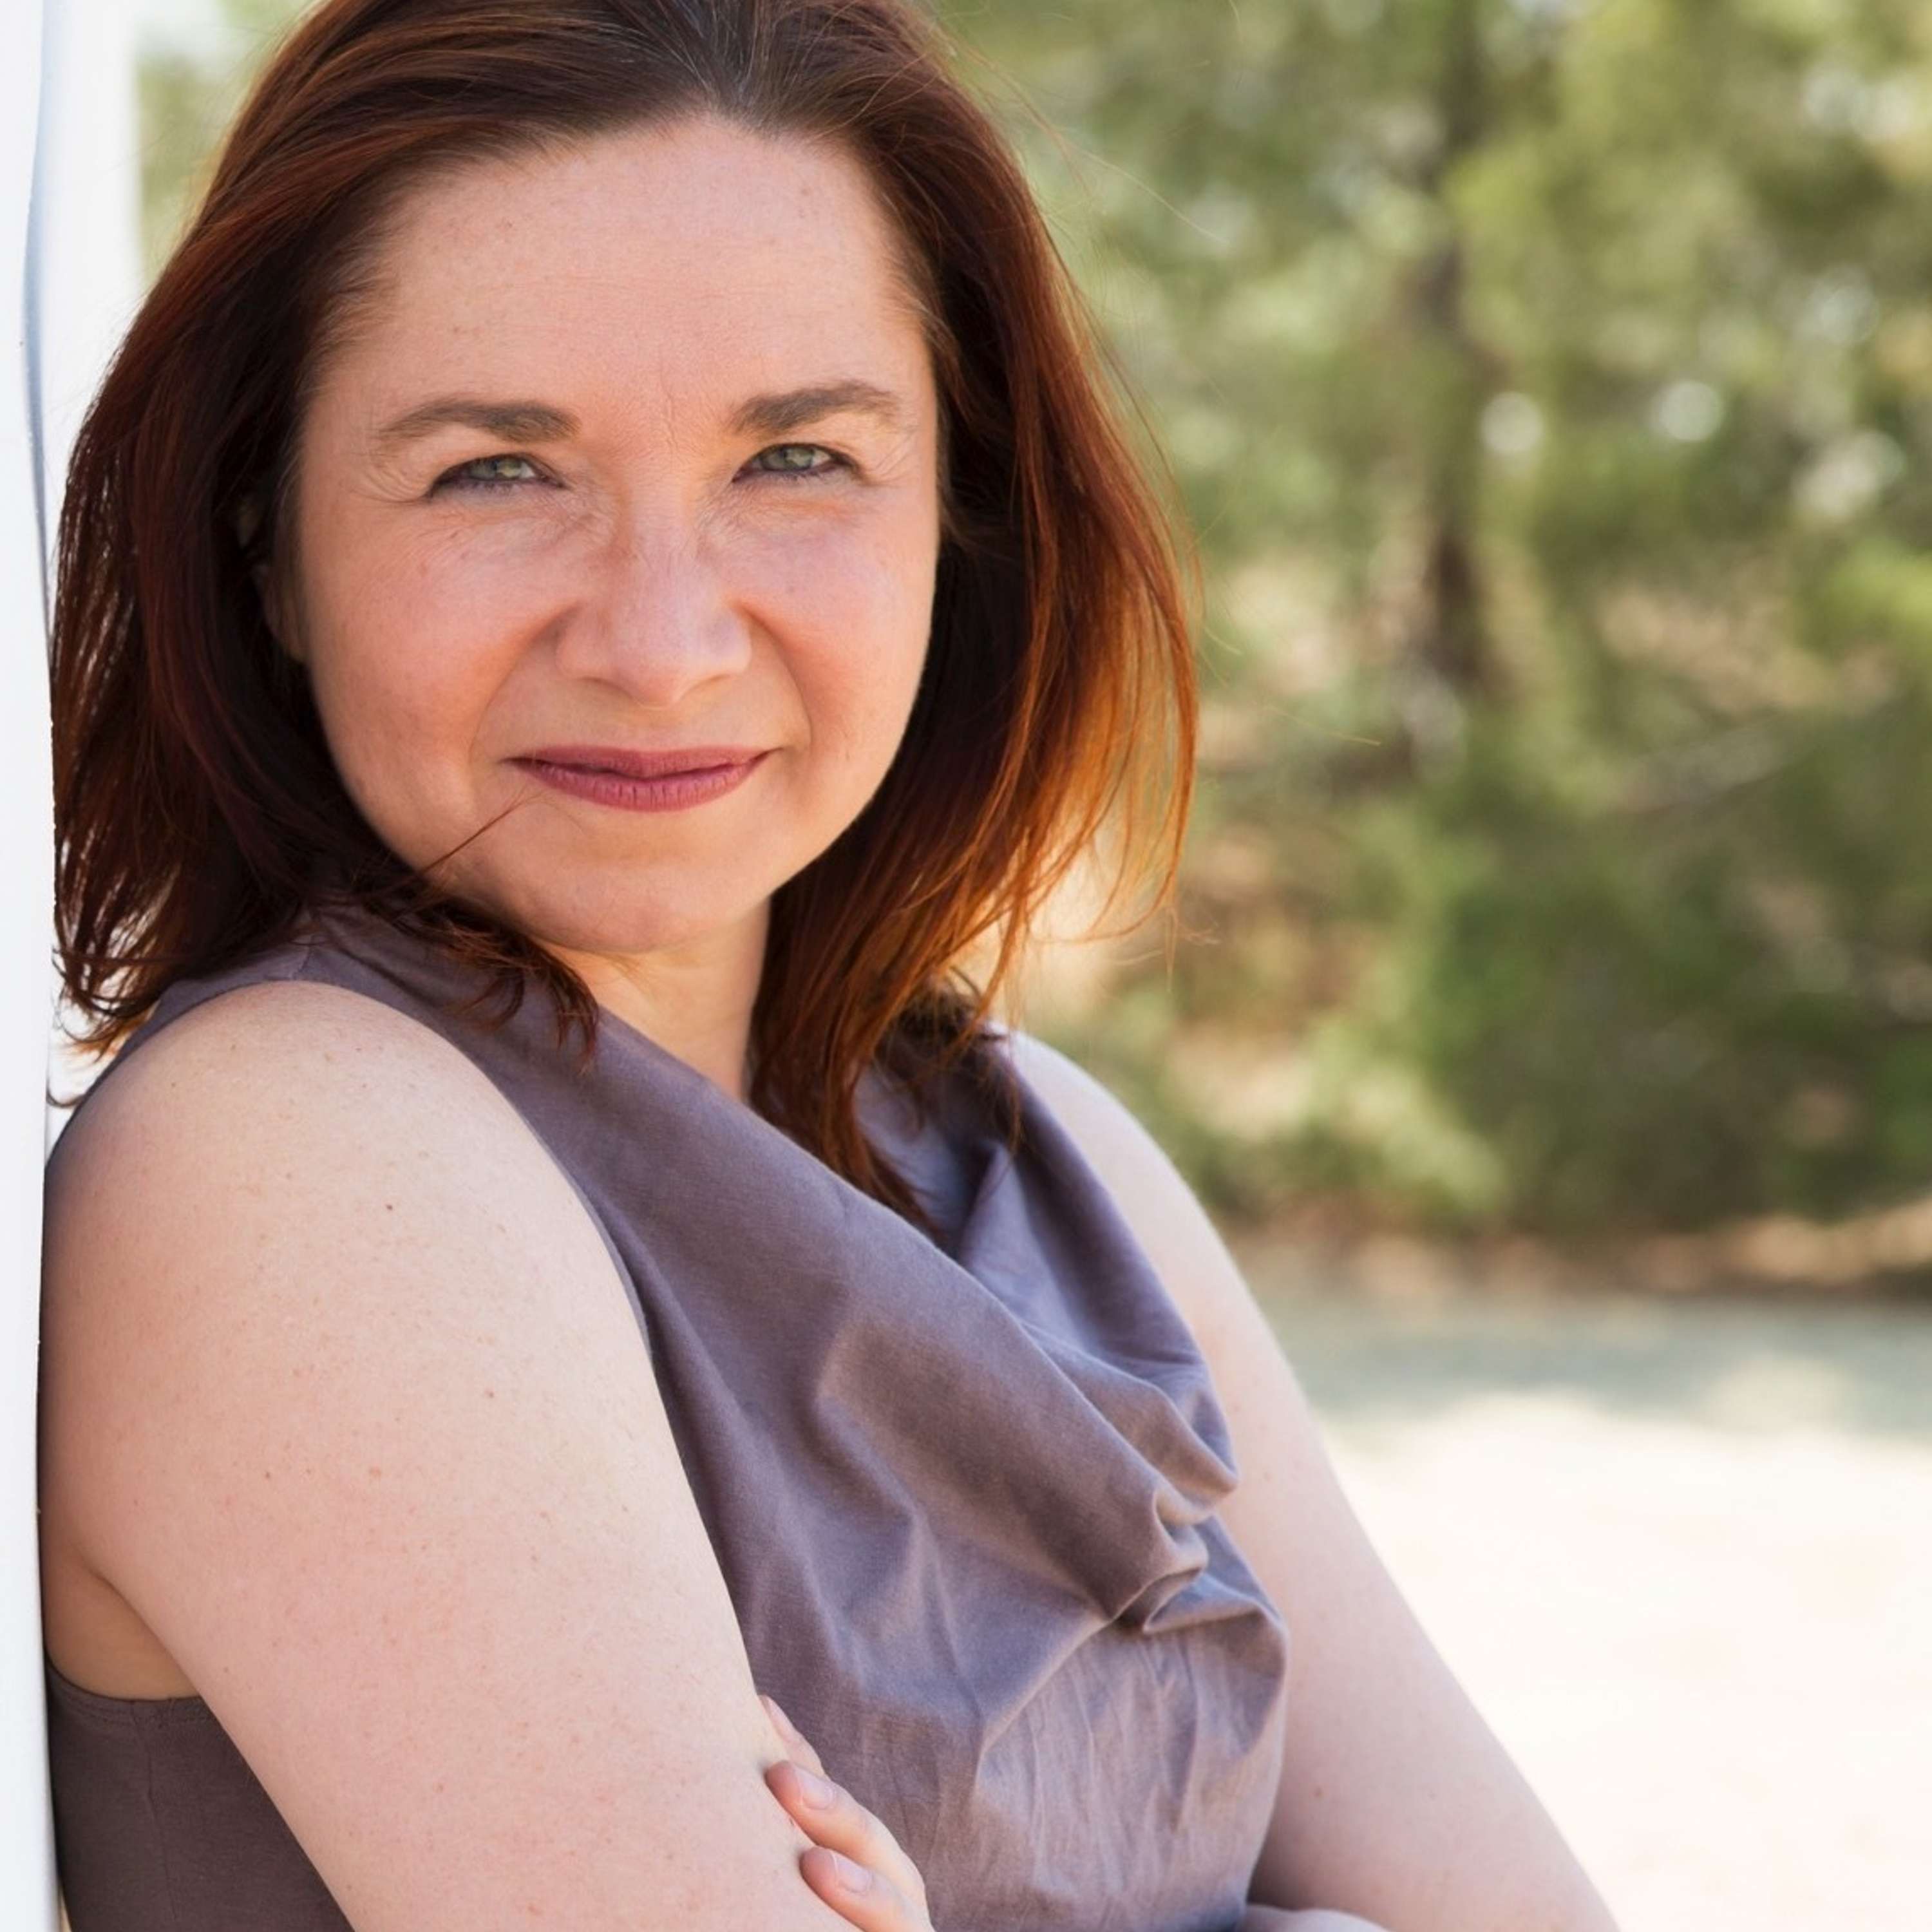 Episode 95: An interview with Dr. Katharine Hayhoe, atmospheric scientist